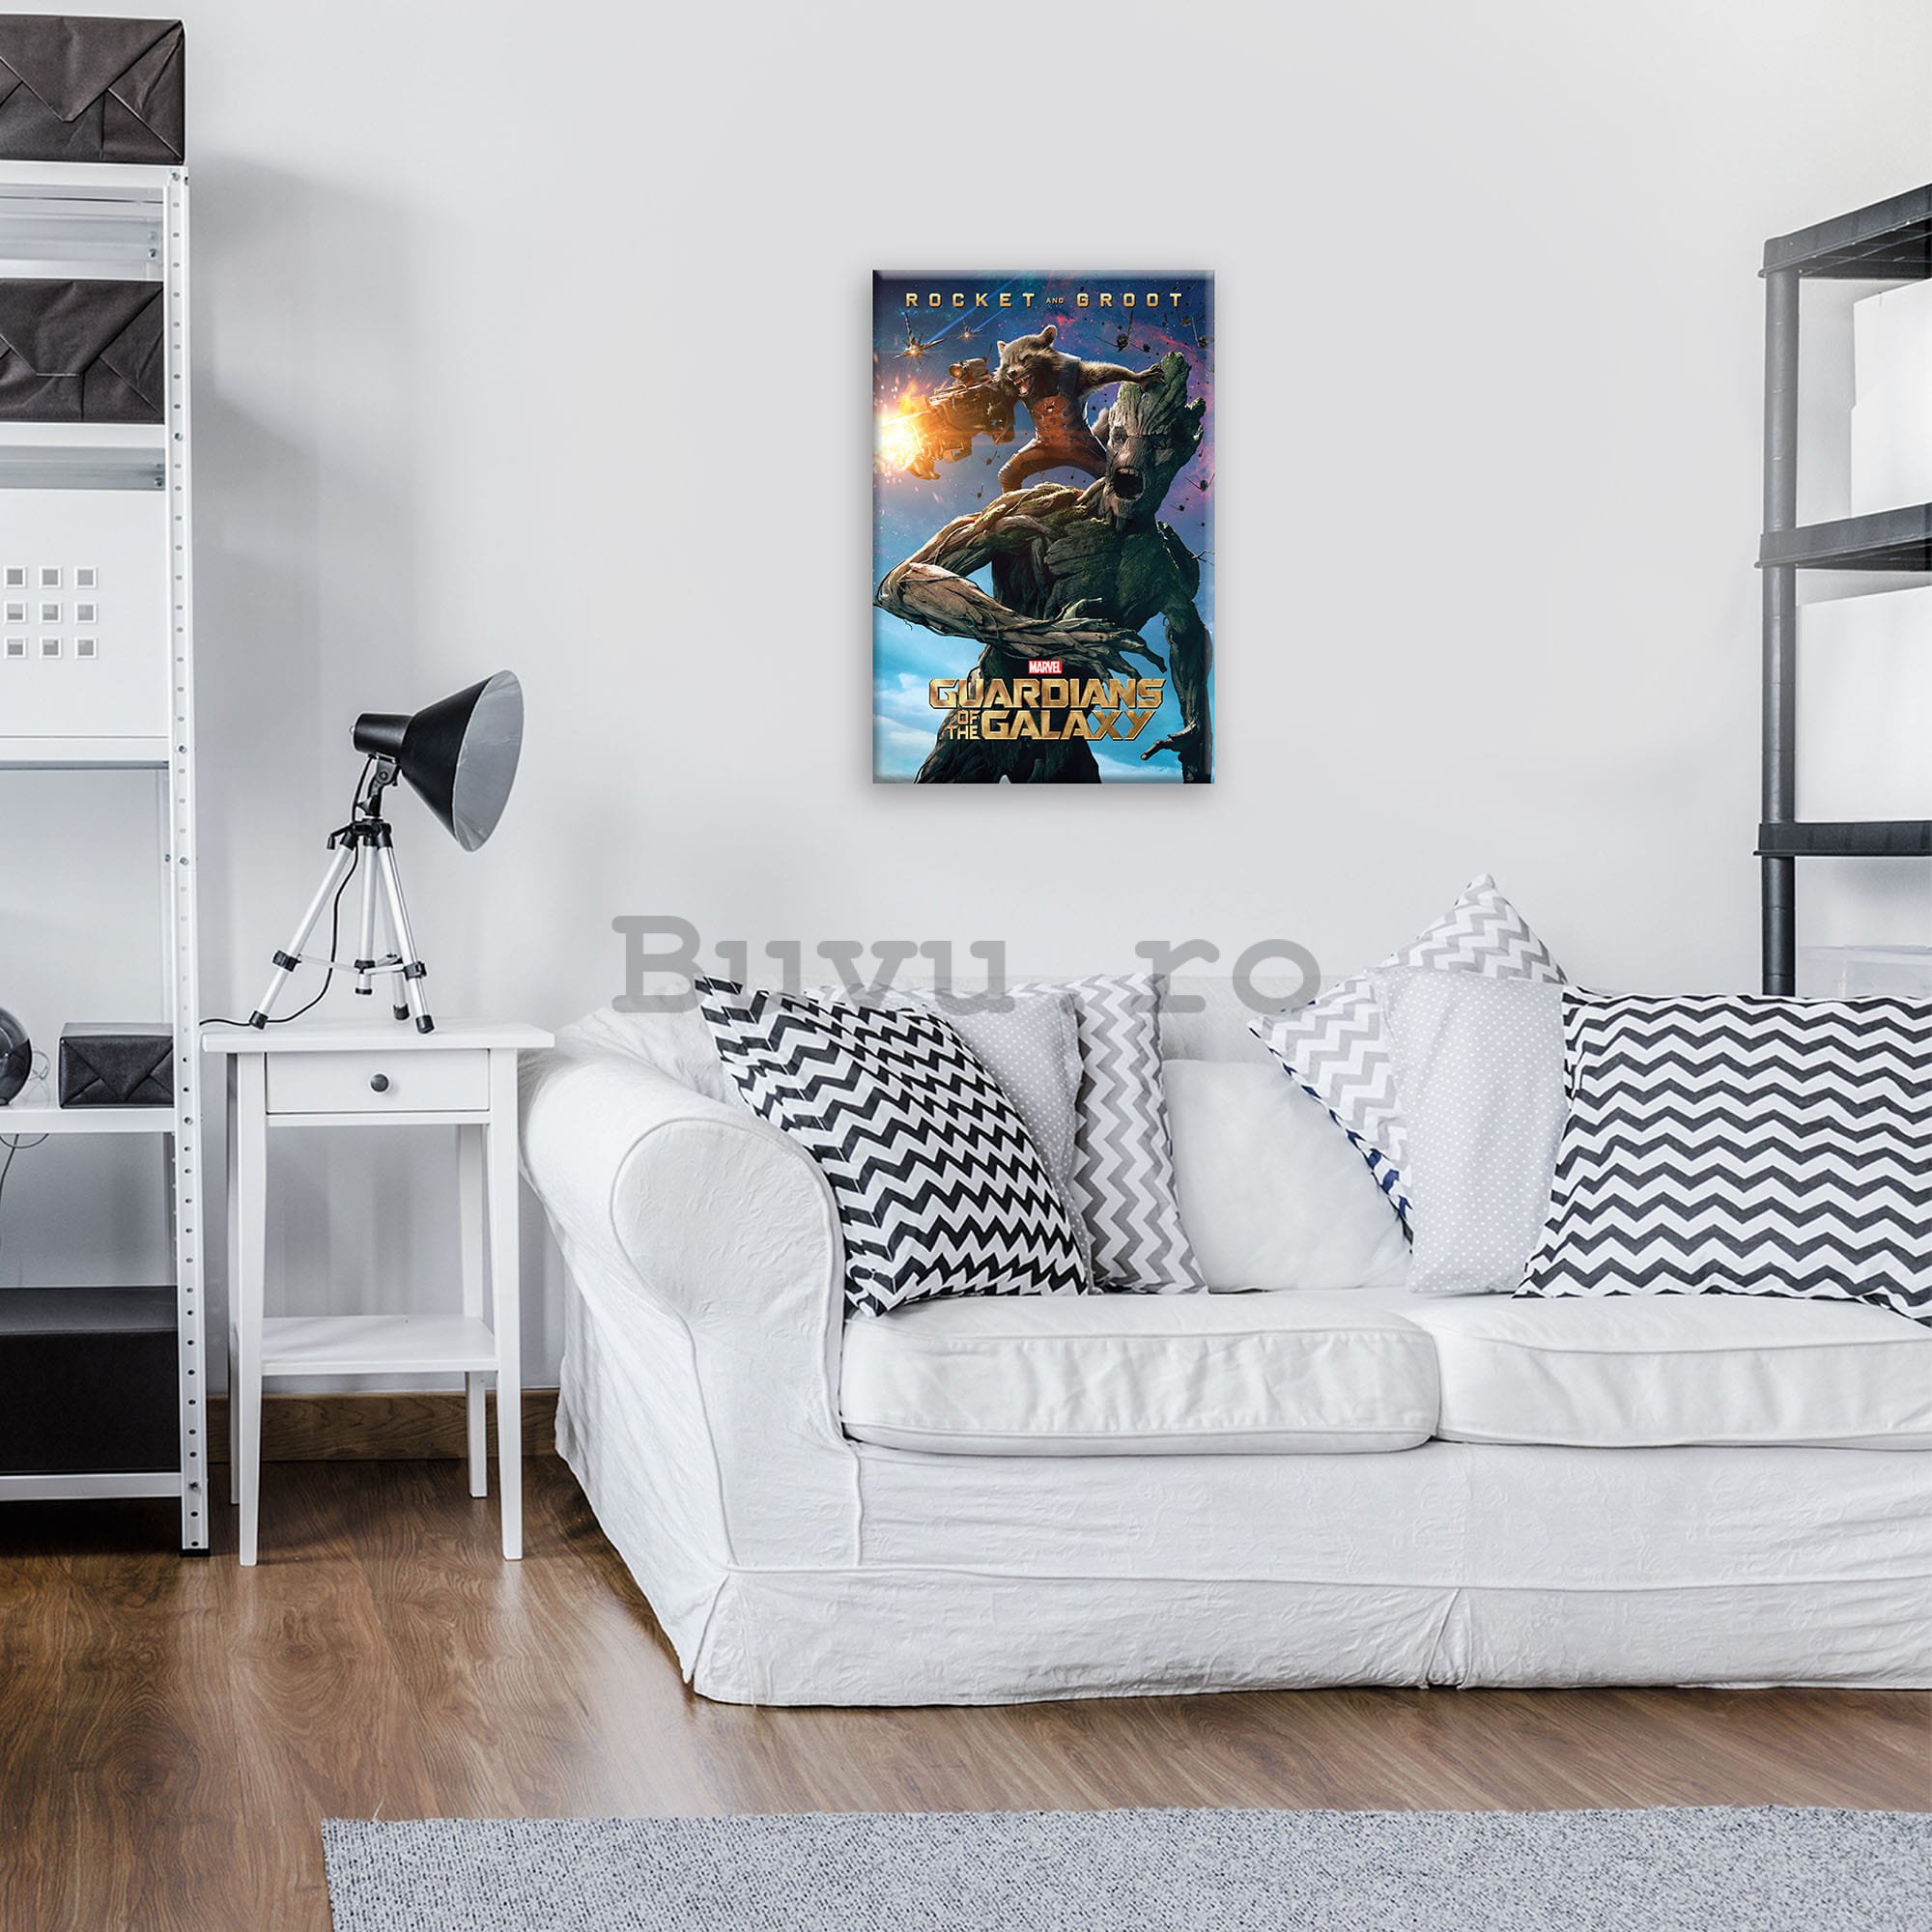 Tablou canvas: Guardians of The Galaxy Rocket & Groot - 40x60 cm